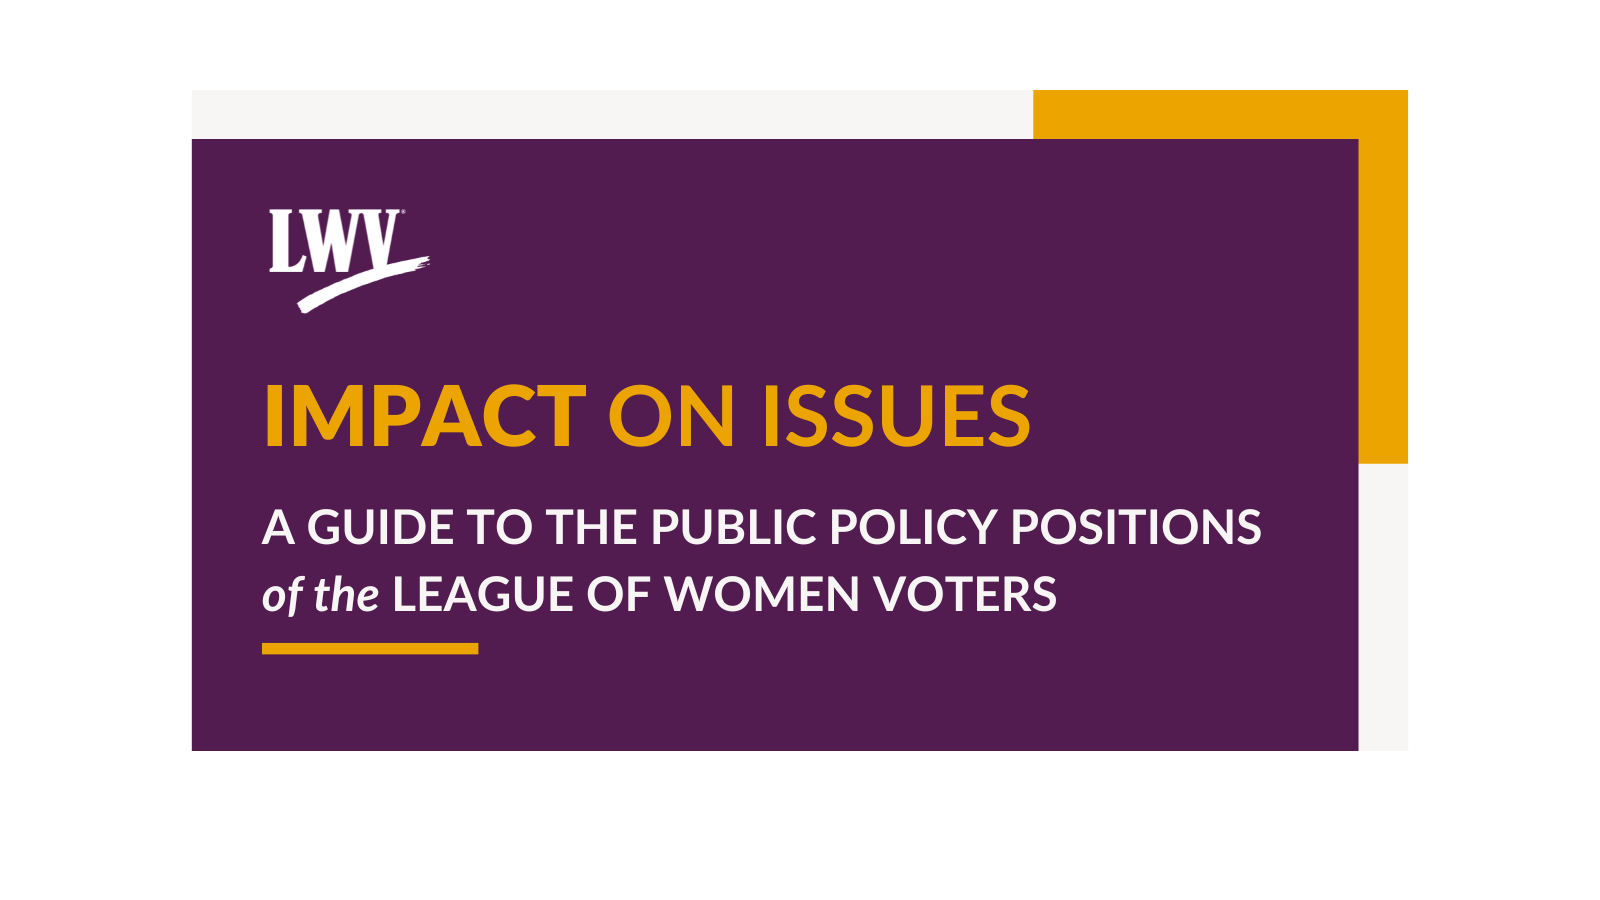 Purple image with white and yellow border. The image has the white LWV logo in the left corner. Underneath the logo, there is "IMPACT ON ISSUES" in yellow font. Below that is "A GUIDE TO THE PUBLIC POLICY POSITIONS OF THE LEAGUE OF WOMEN VOTERS" in white font, with a yellow line underneath that text.